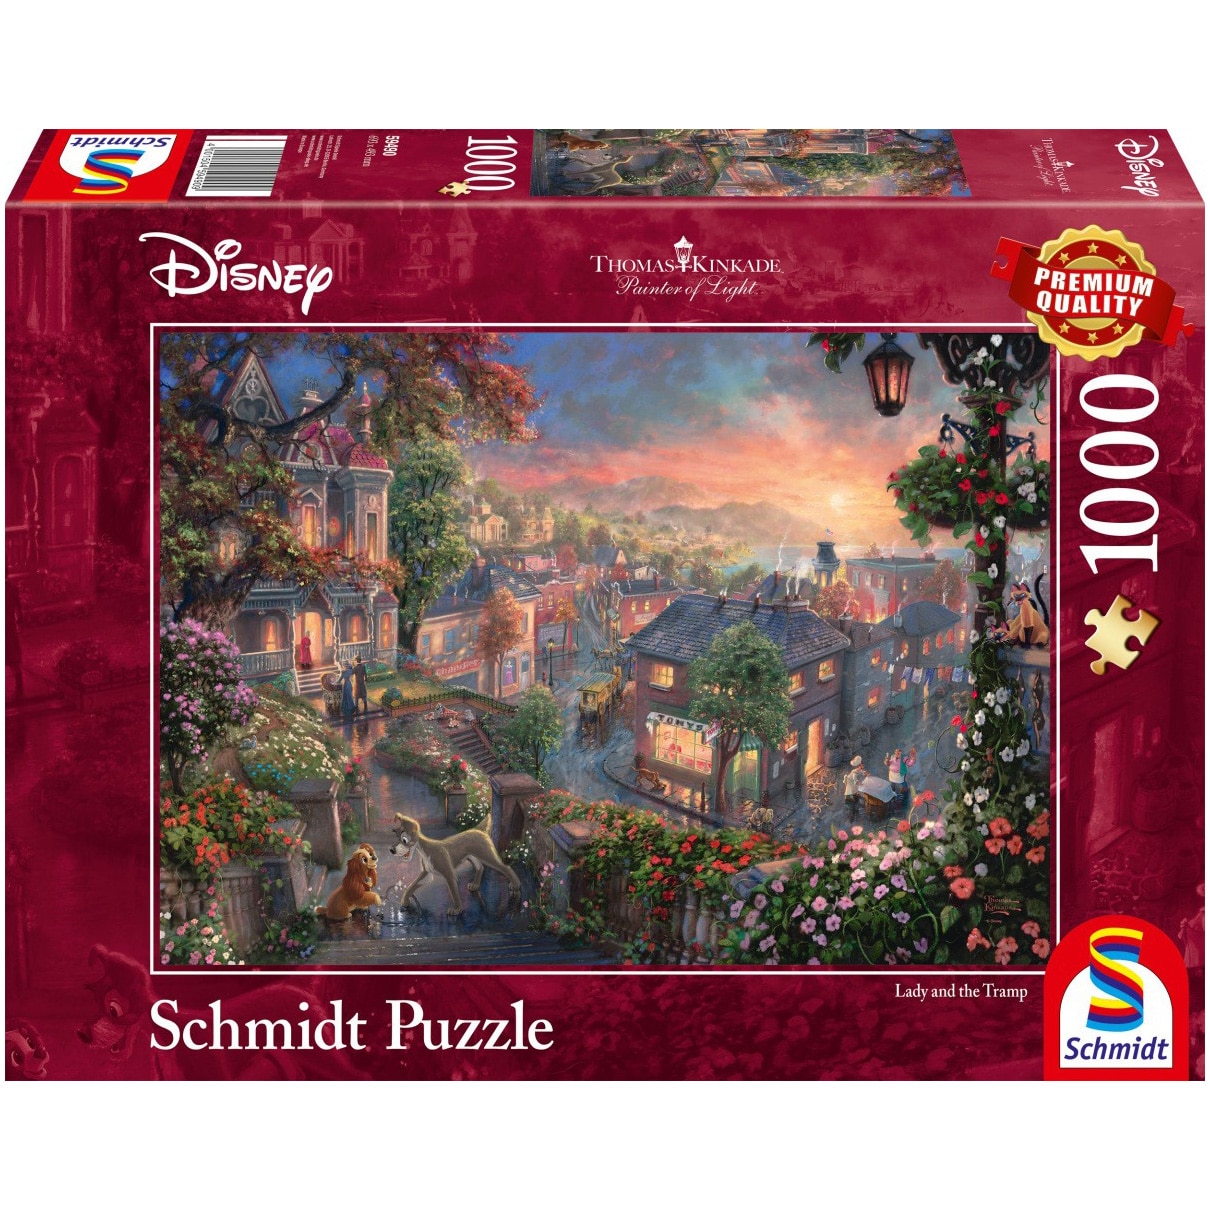 Puzzle 1000 piese - Thomas Kinkade - Disney - Lady and The Tramp | Schmidt